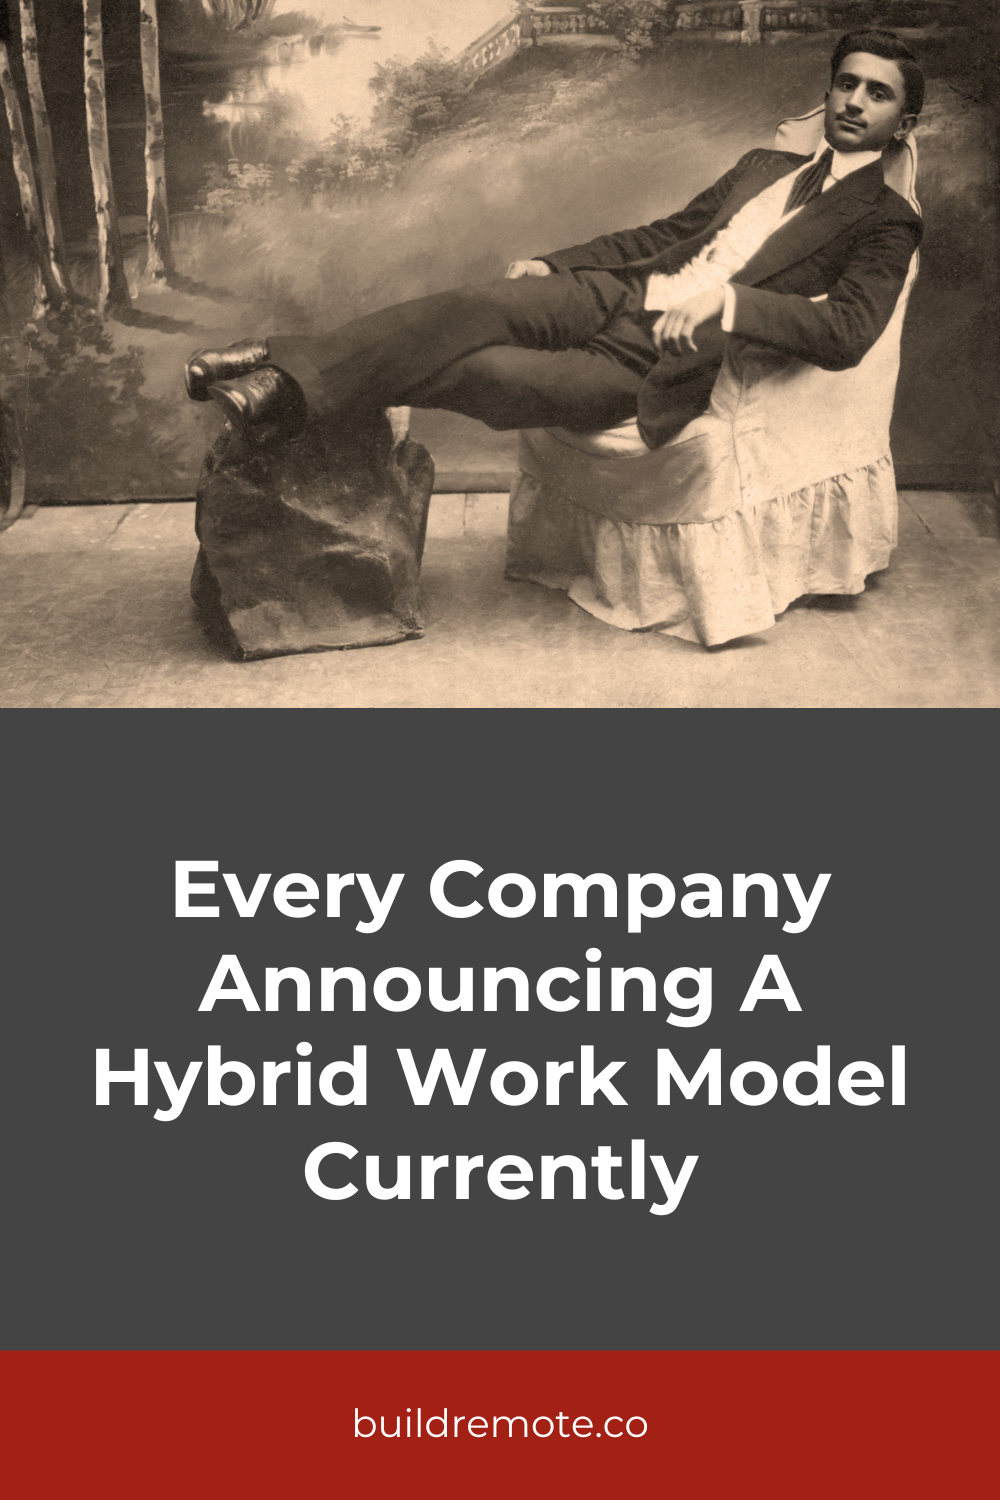 Pinterest Image - Every Company Announcing A Hybrid Work Model